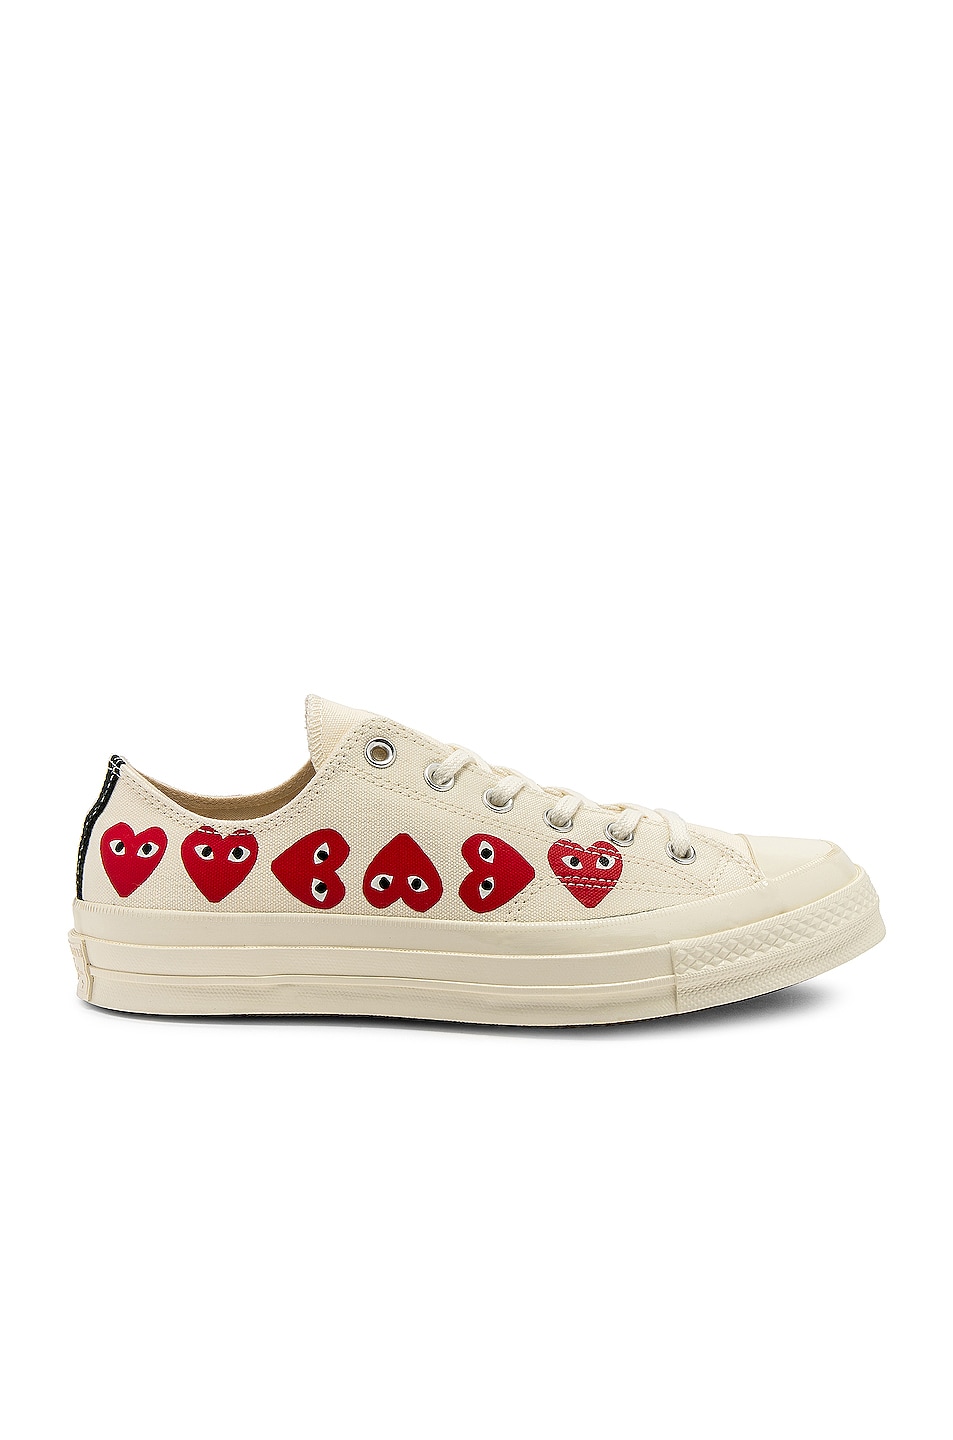 Comme Des Garcons PLAY Emblem Low Top Sneaker in Off White | FWRD